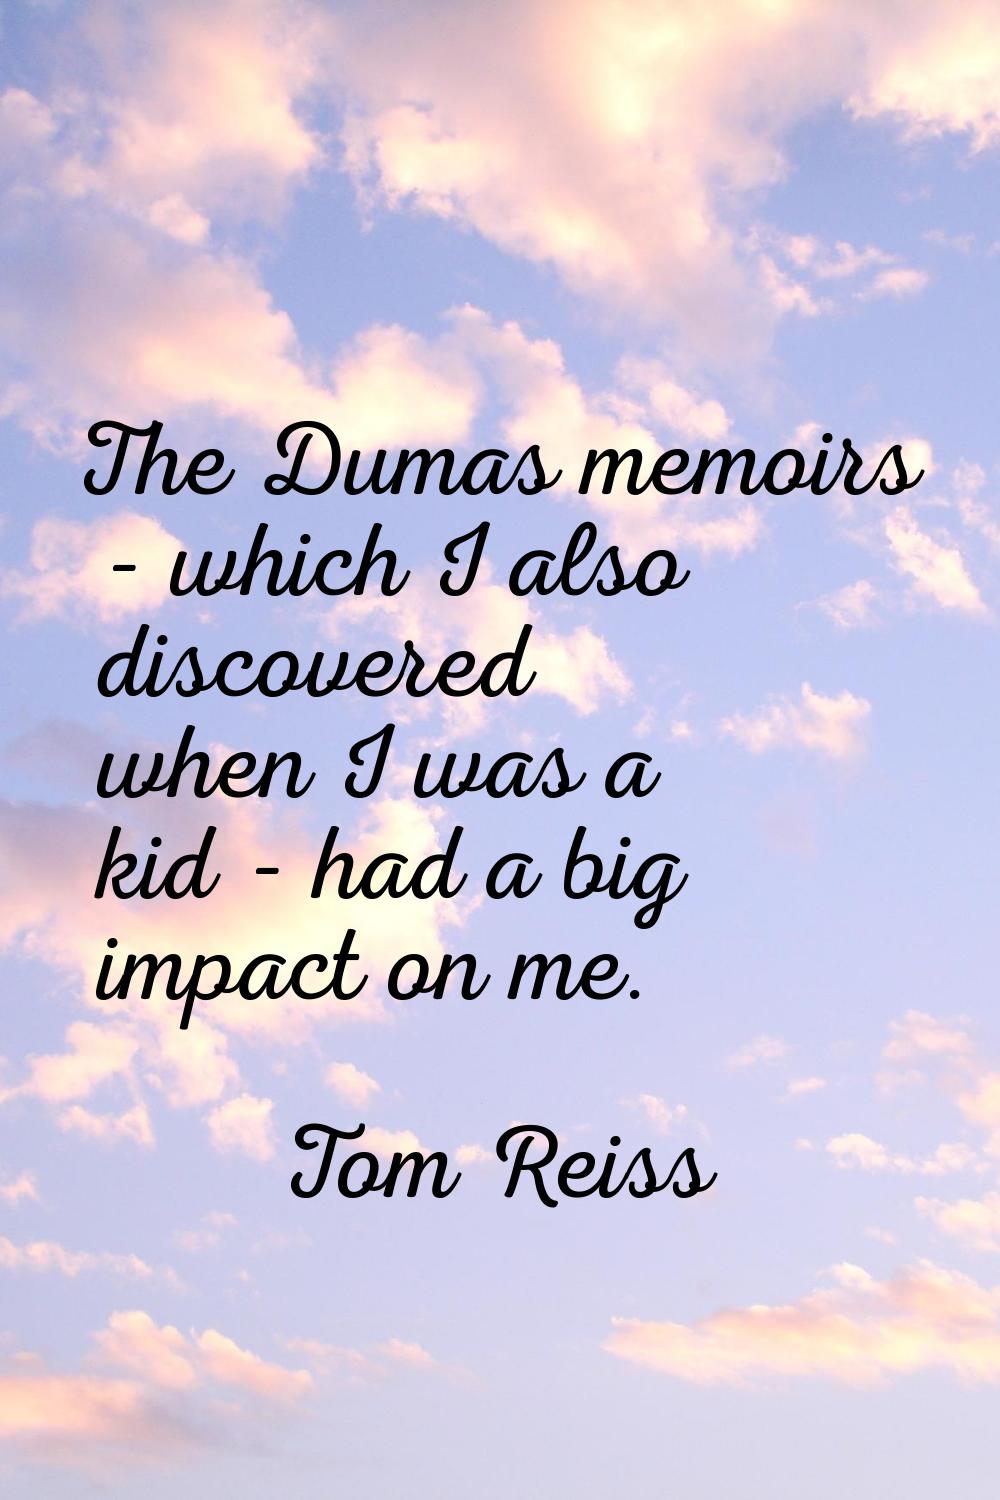 The Dumas memoirs - which I also discovered when I was a kid - had a big impact on me.